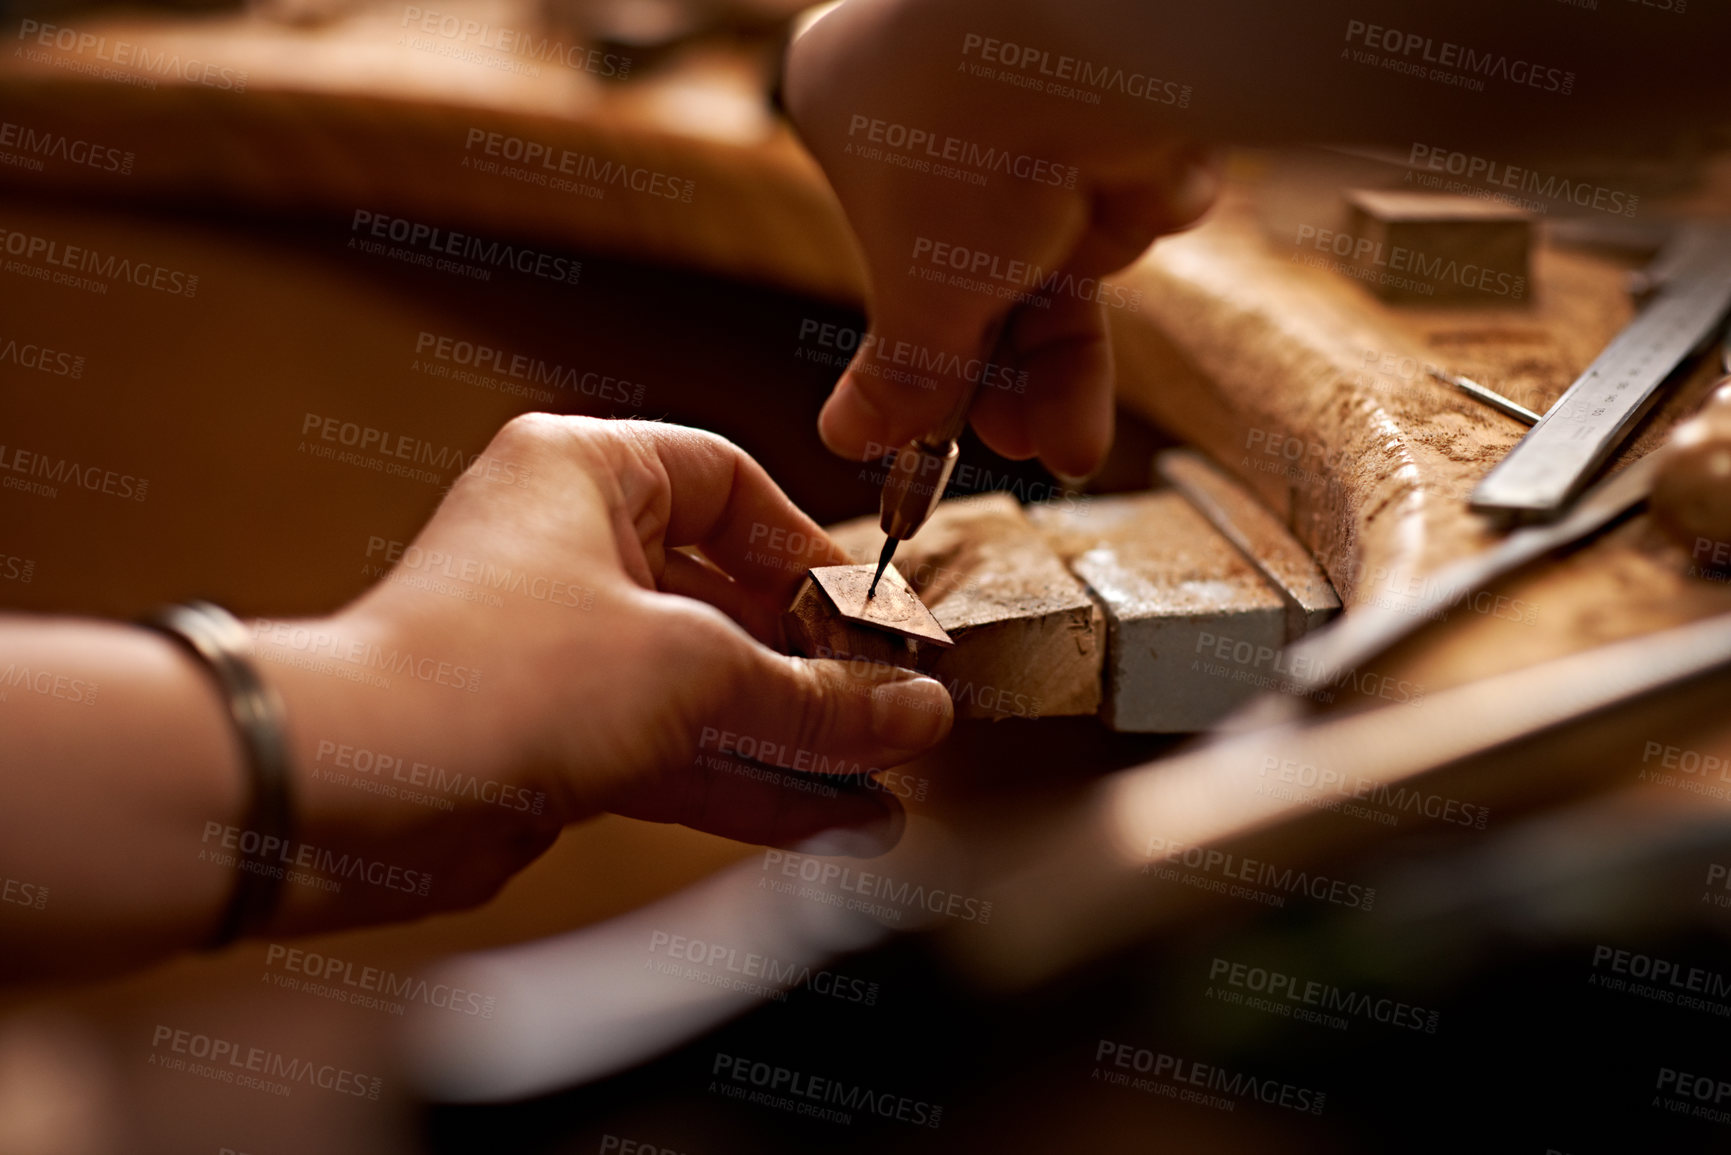 Buy stock photo A person using a tool to work on a piece of wood